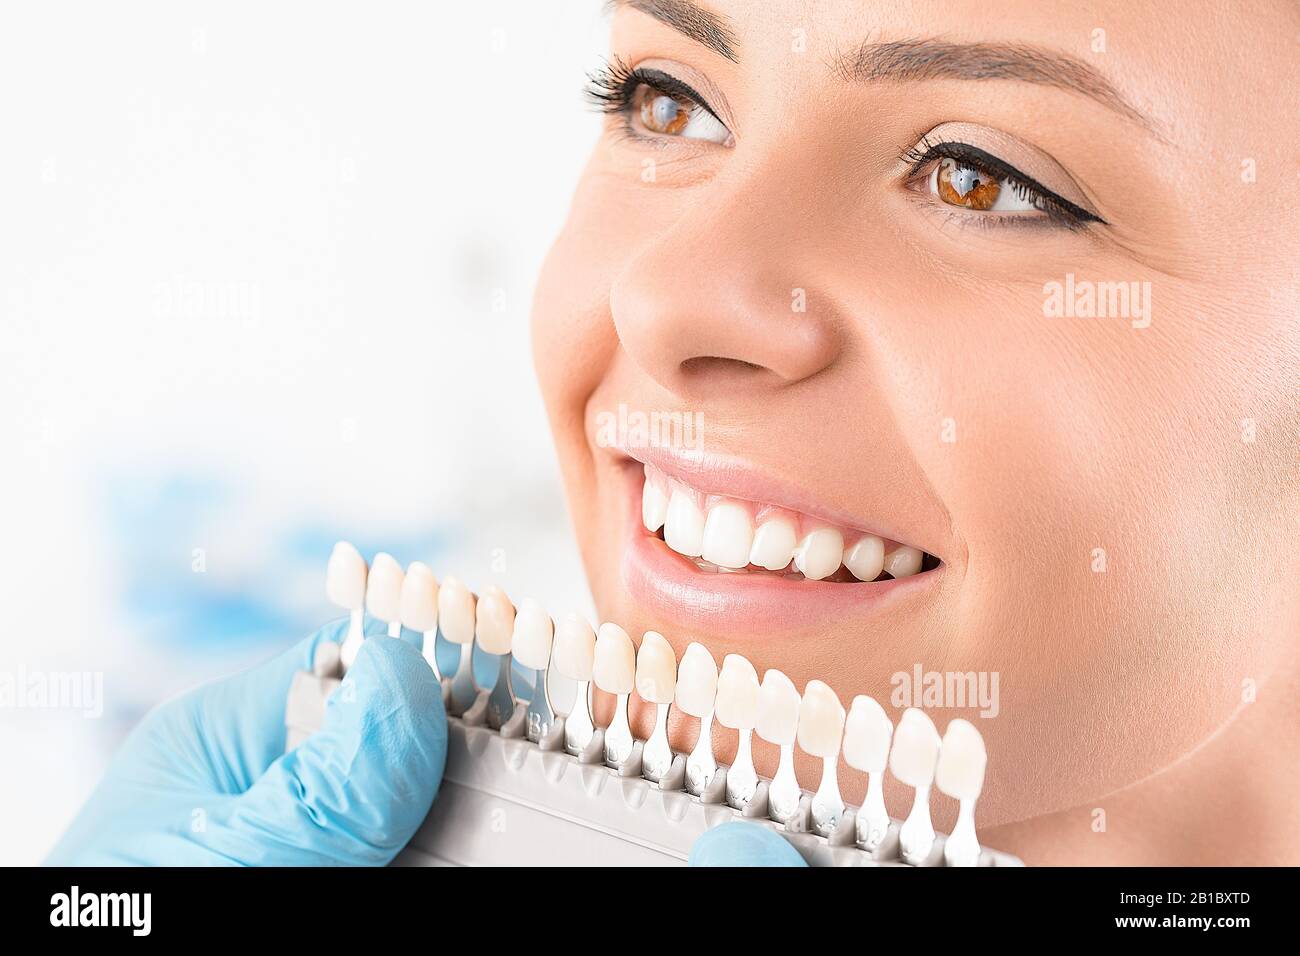 Beautiful smile and white teeth of a young woman. Matching the shades of the implants or the process of teeth whitening. Stock Photo